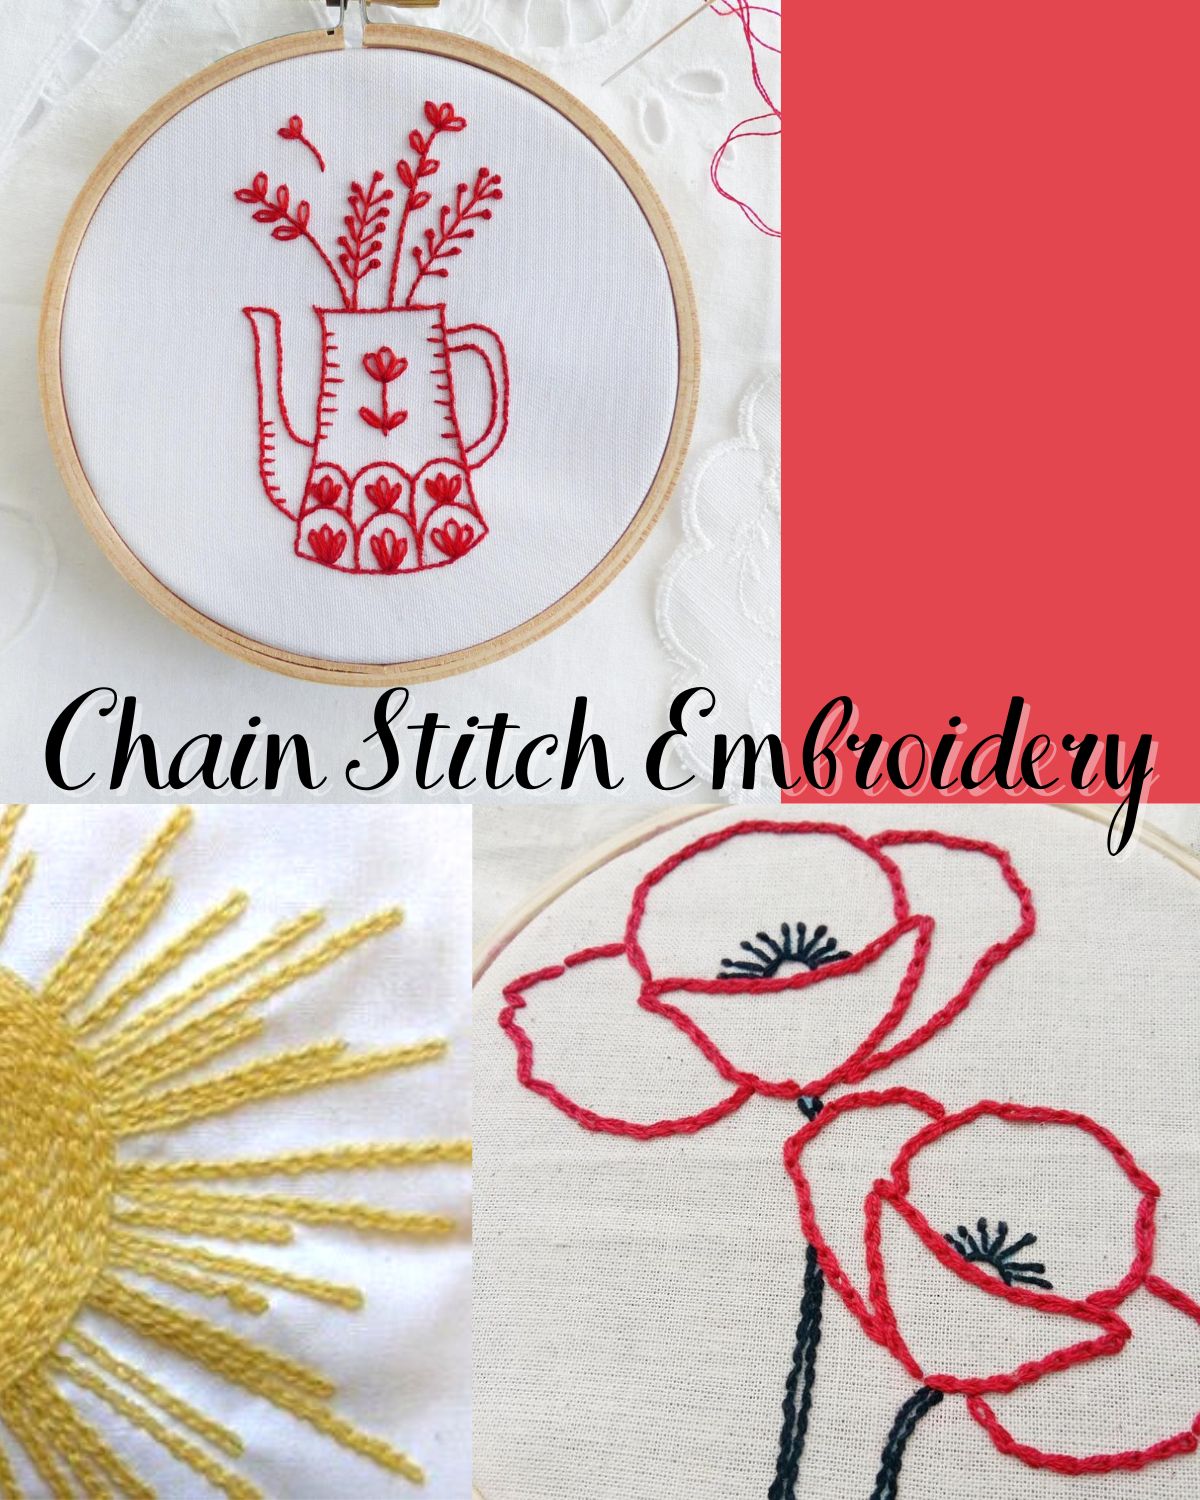 Three different simple embroidery patterns